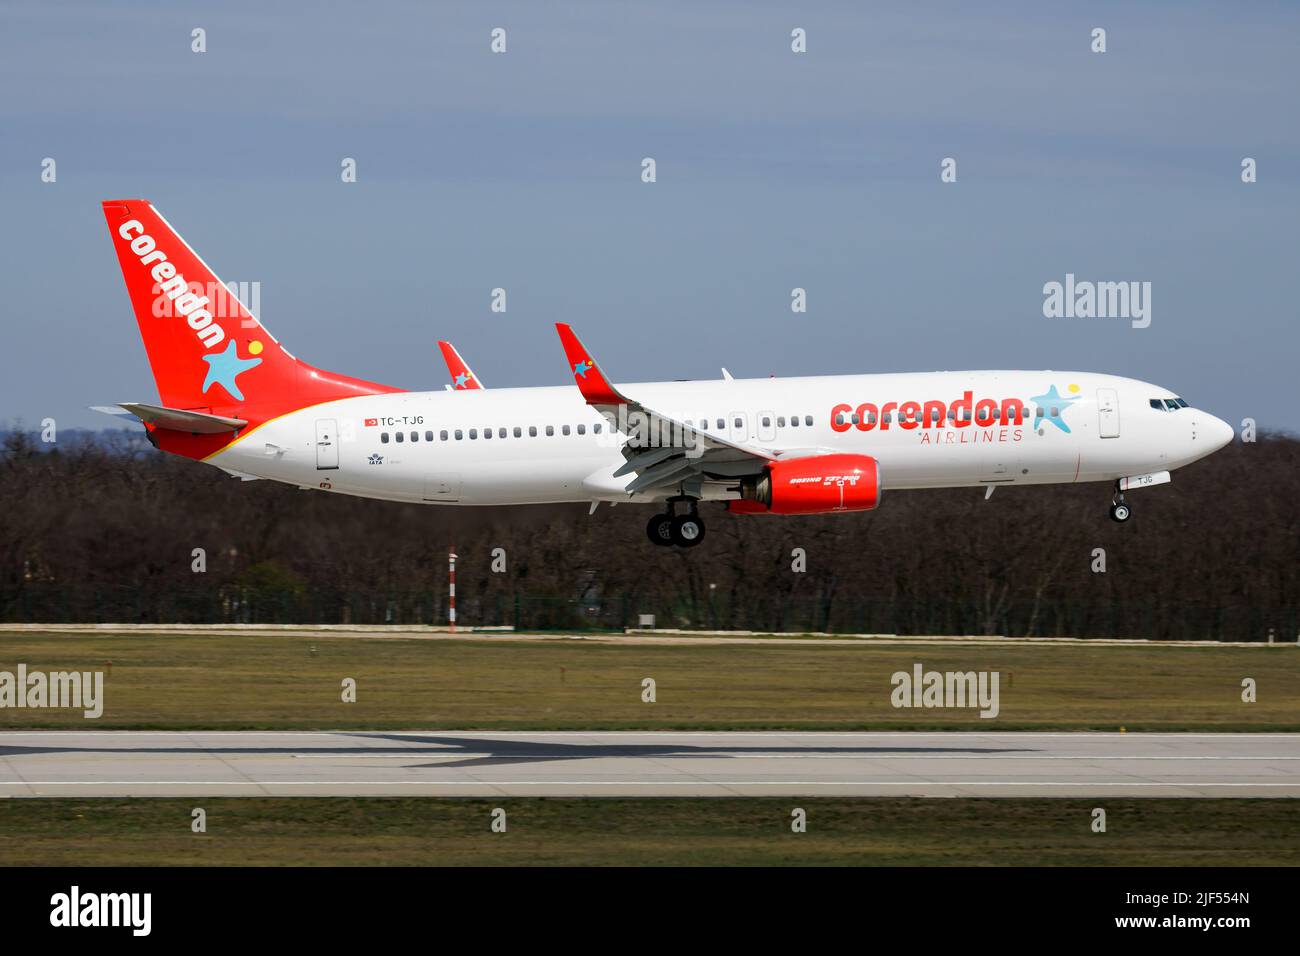 Budapest, Hungary - April 1, 2016: Corendon Airlines passenger plane at airport. Schedule flight travel. Aviation and aircraft. Air transport. Global Stock Photo